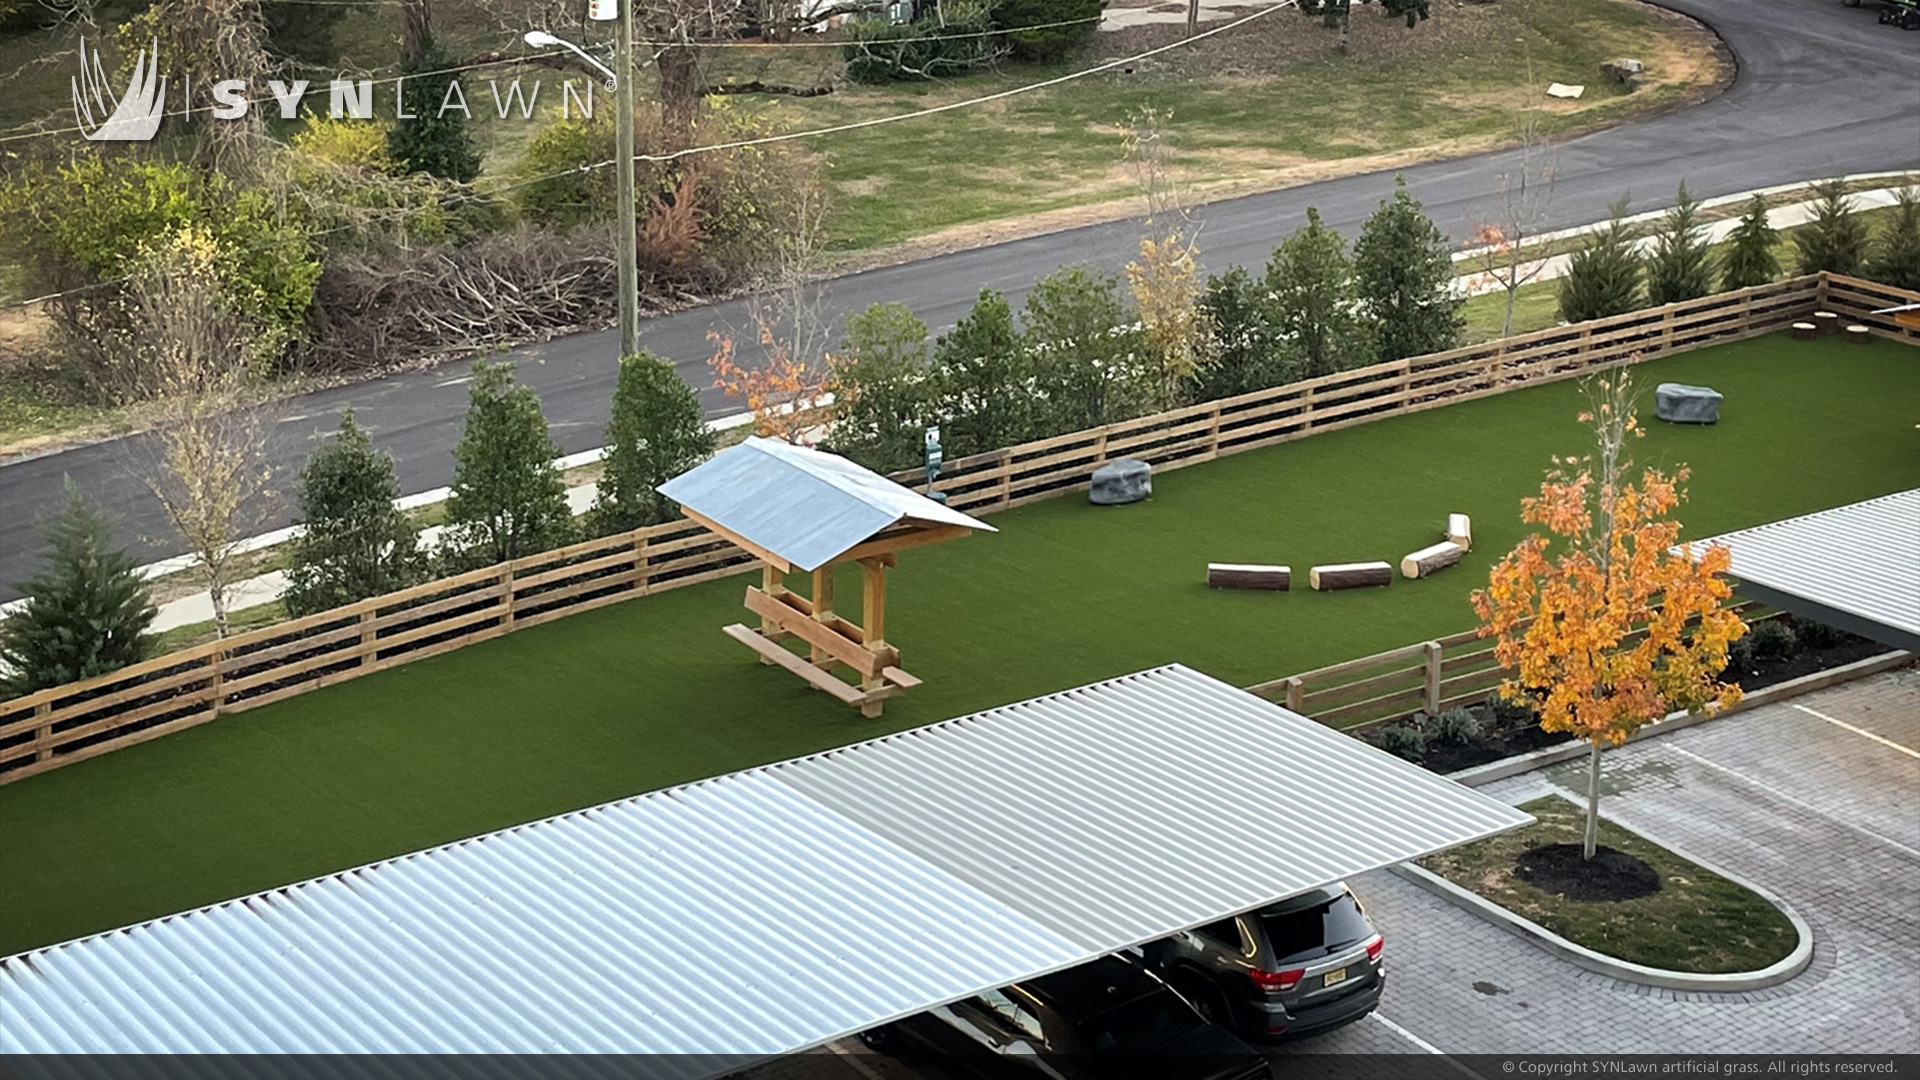 The Novel West Apartment Complex in Nashville Gets Reimagined Dog Park Benefiting Residents